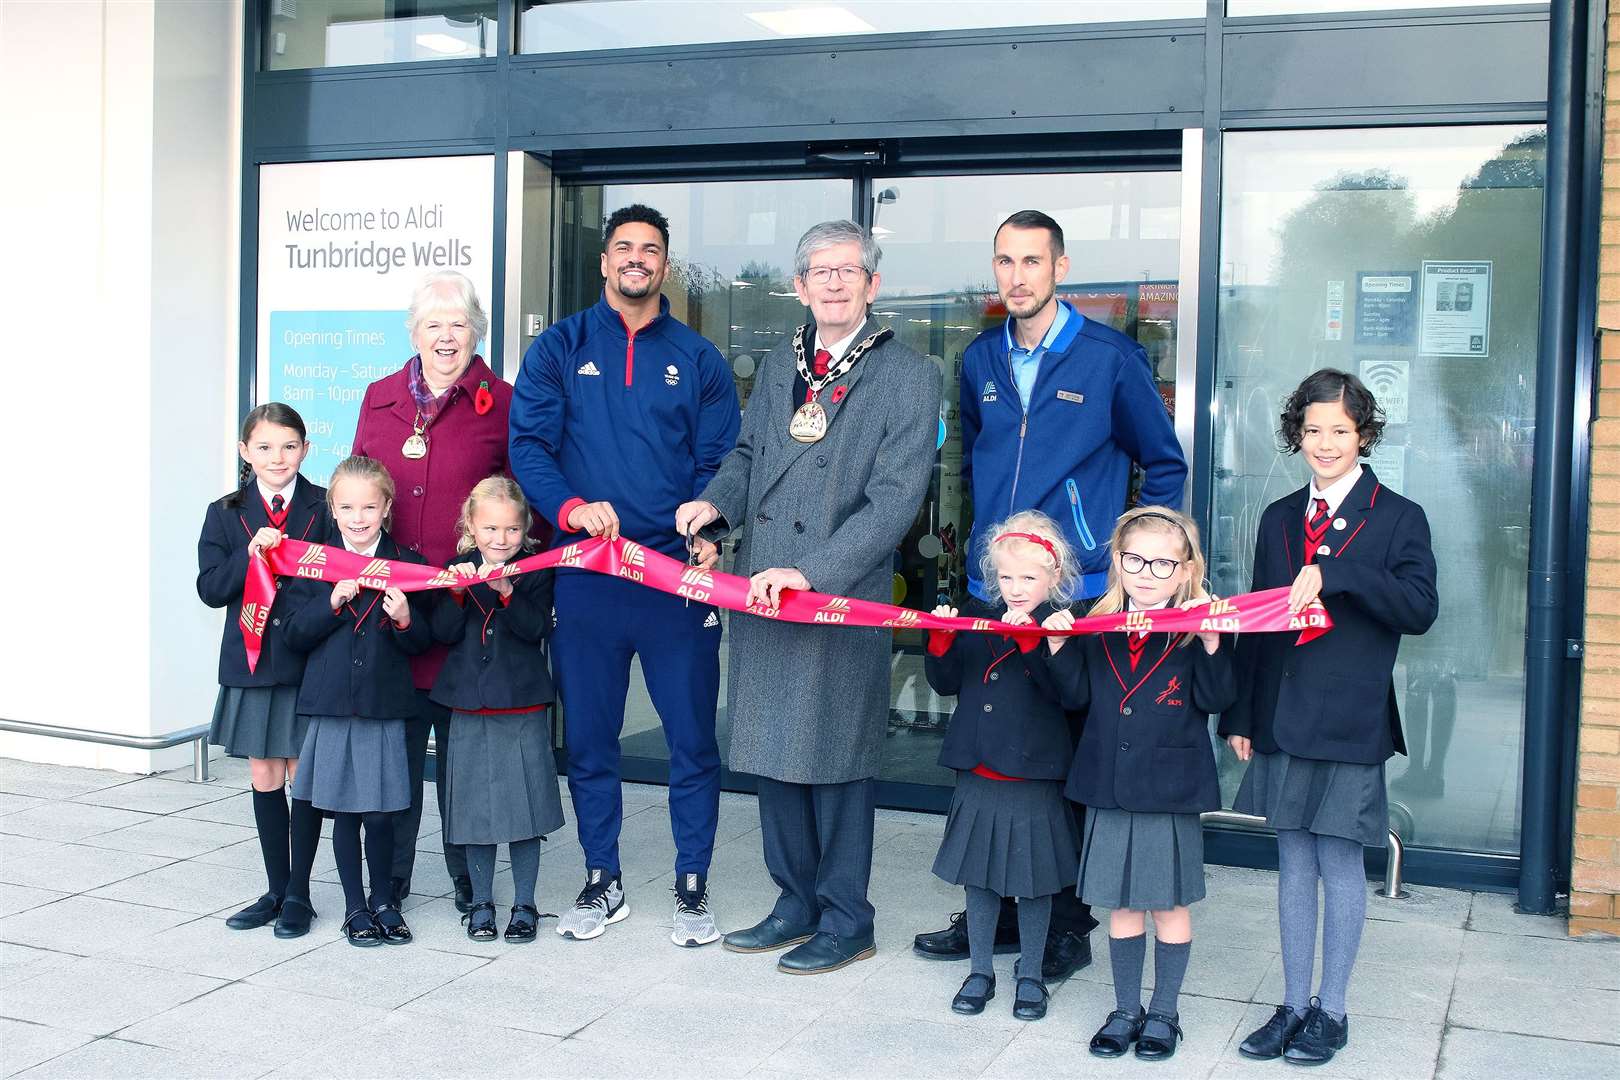 Store manager, Team GB athlete Antony Ogogo, the Mayor and Mayoress of Tunbridge Wells Borough Council and pupils from Skinner’s Kent Primary School cutting the ribbon to open the store